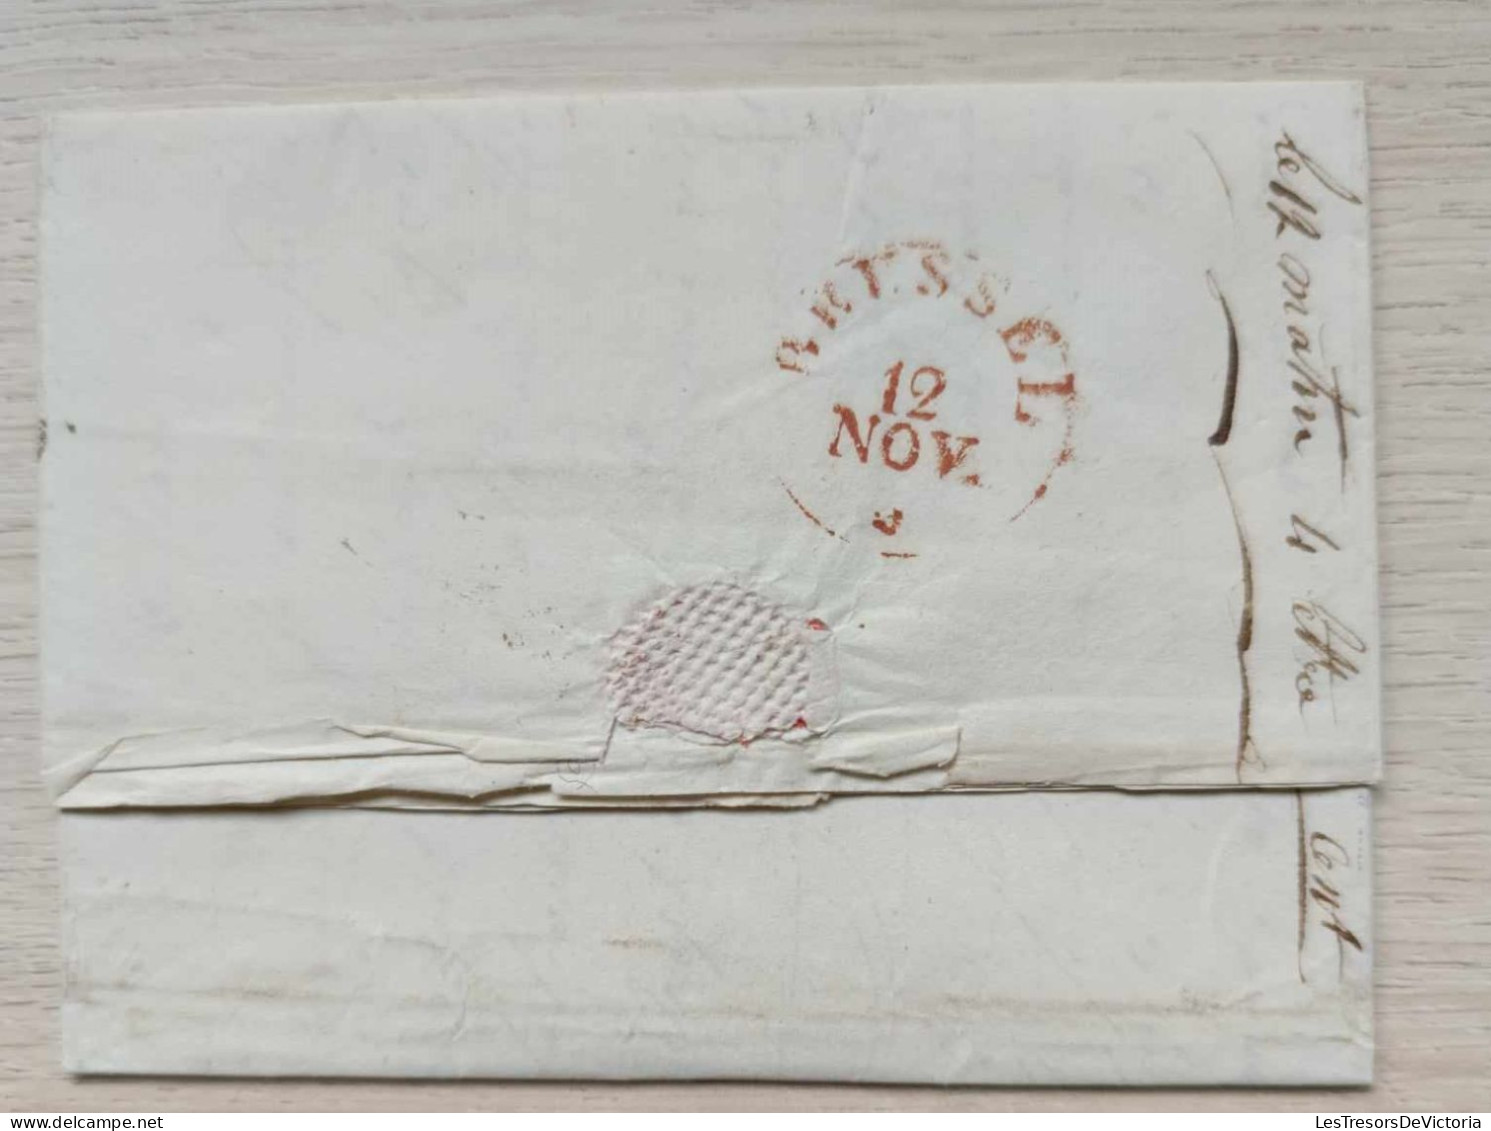 Belgique - Letter From Verviers Mailed On November 21st 1829 To Brussels - Weight 16ws Wigtjes - 1815-1830 (Holländische Periode)